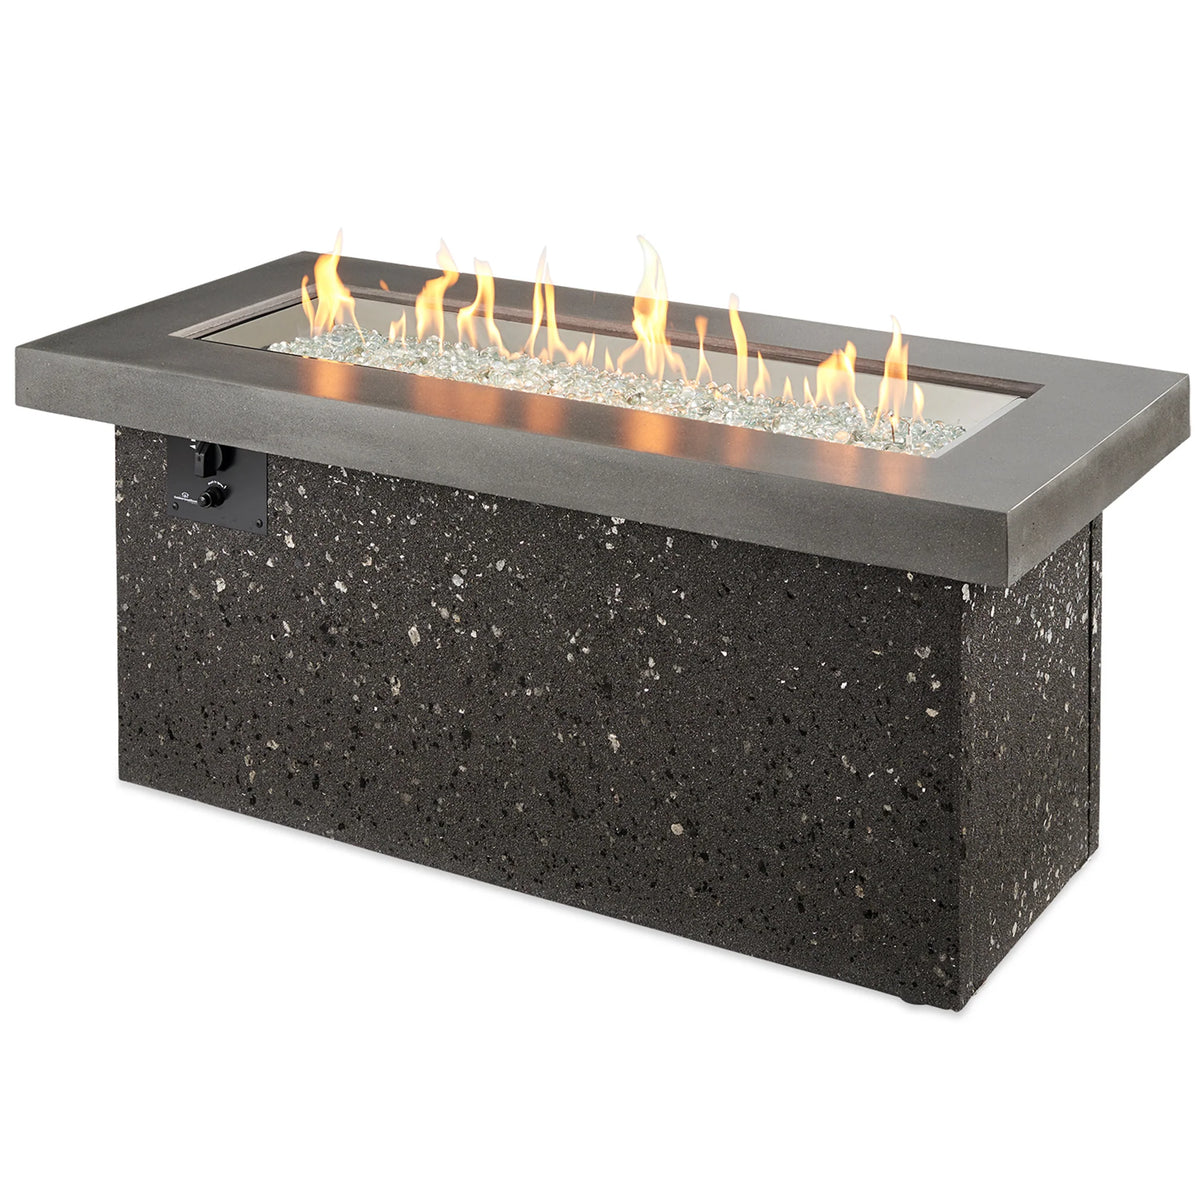 Outdoor GreatRoom Company Grey Key Largo Linear Gas Fire Pit Table